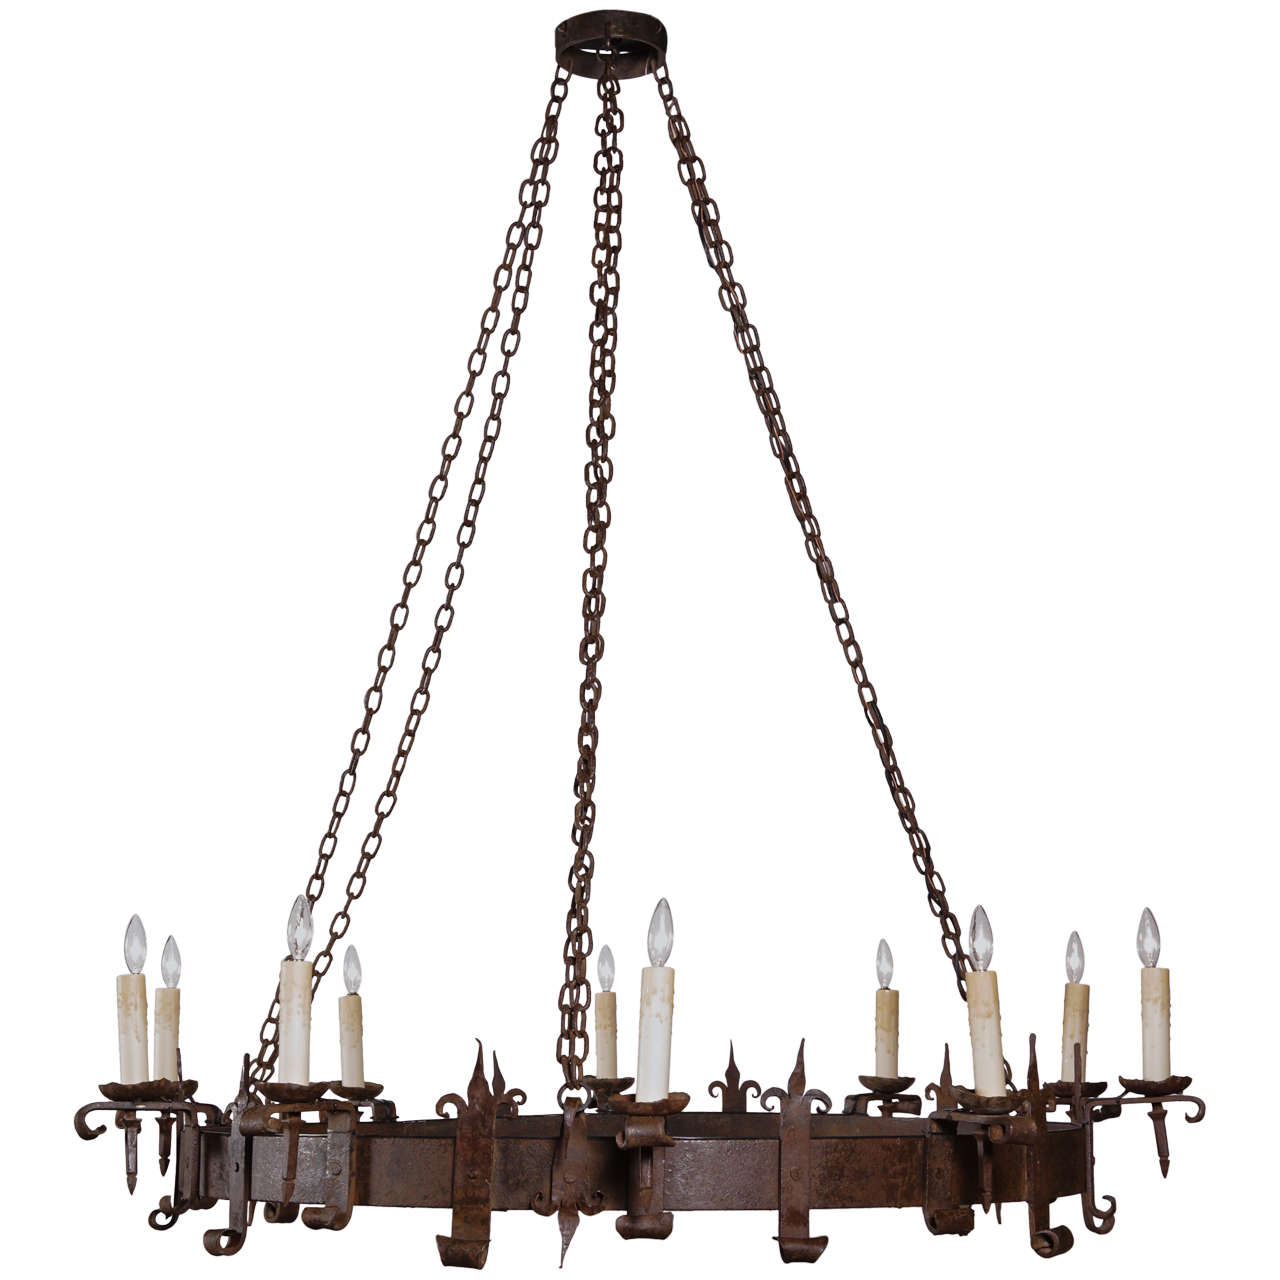 Large 19th C. Iron Chandelier